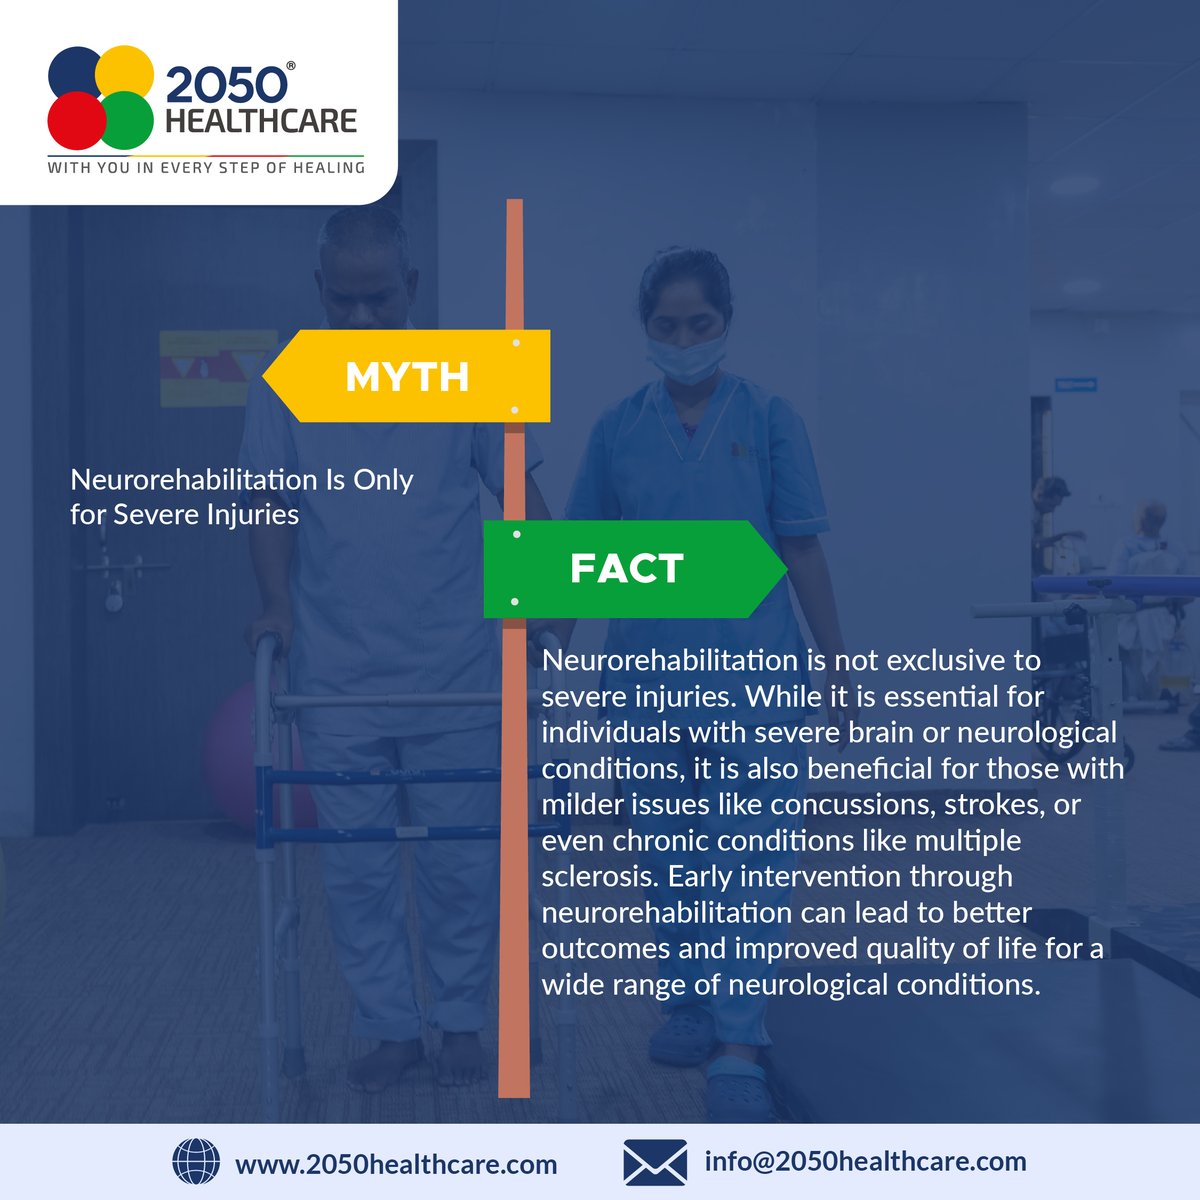 Let's debunk the myths and unveil the facts! 💙

#2050Healthcare #WithYouInEveryStepOfHealing